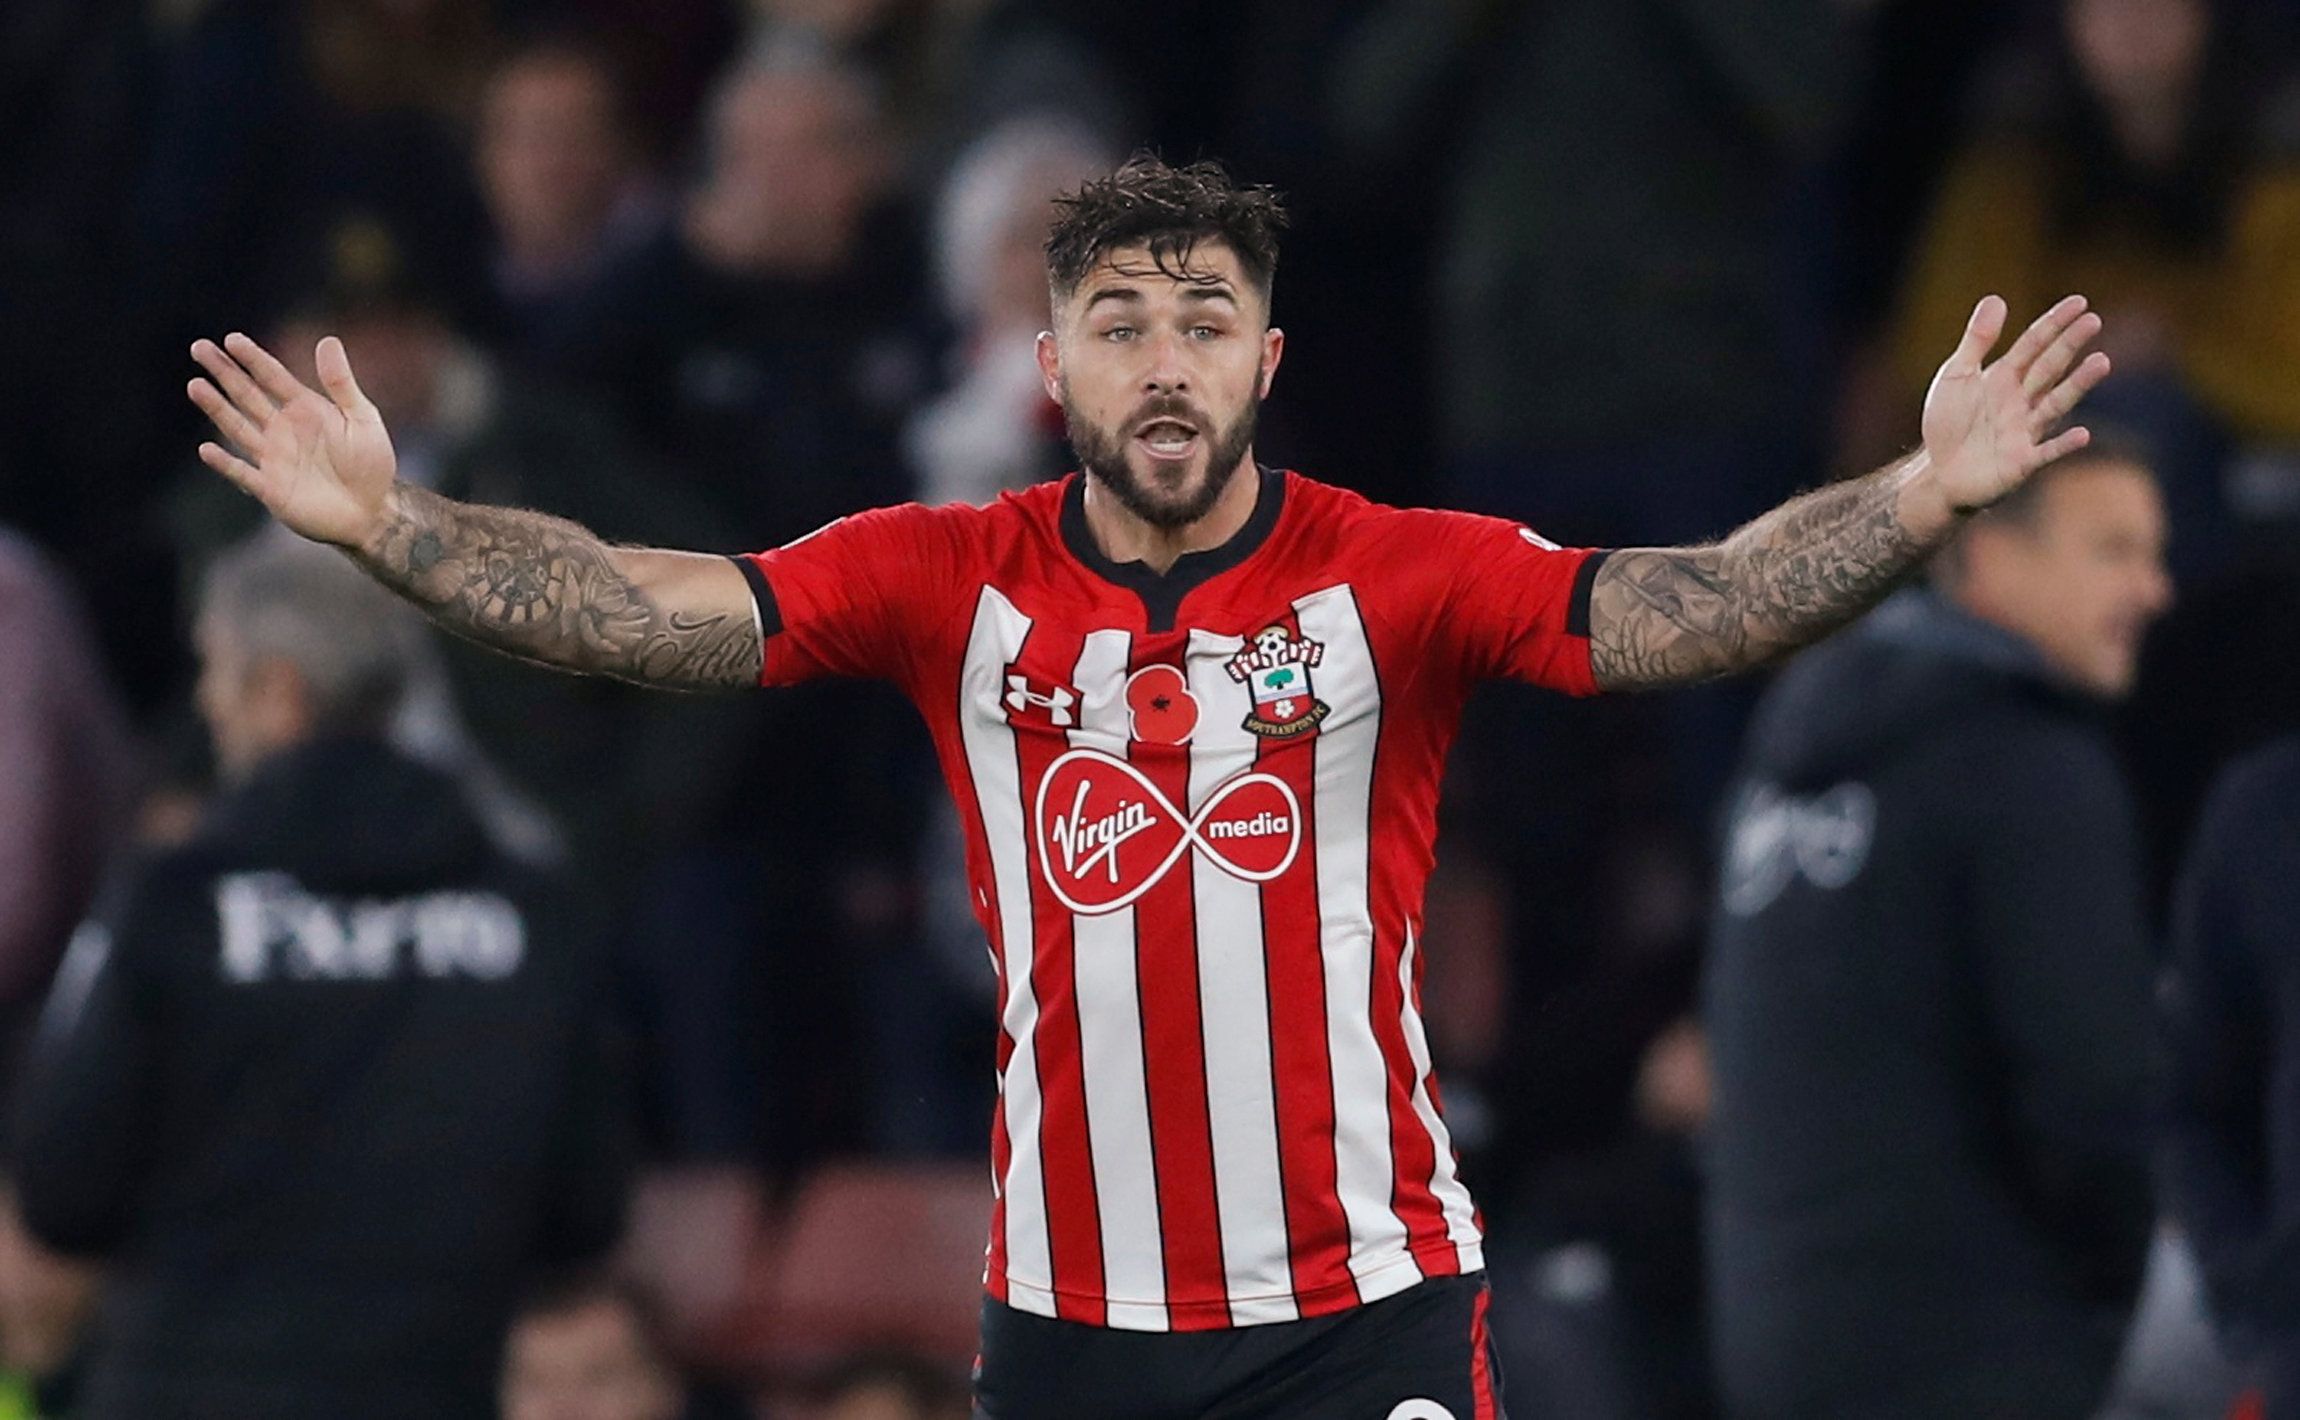 Southampton's Charlie Austin reacts in astonishment after his goal is disallowed